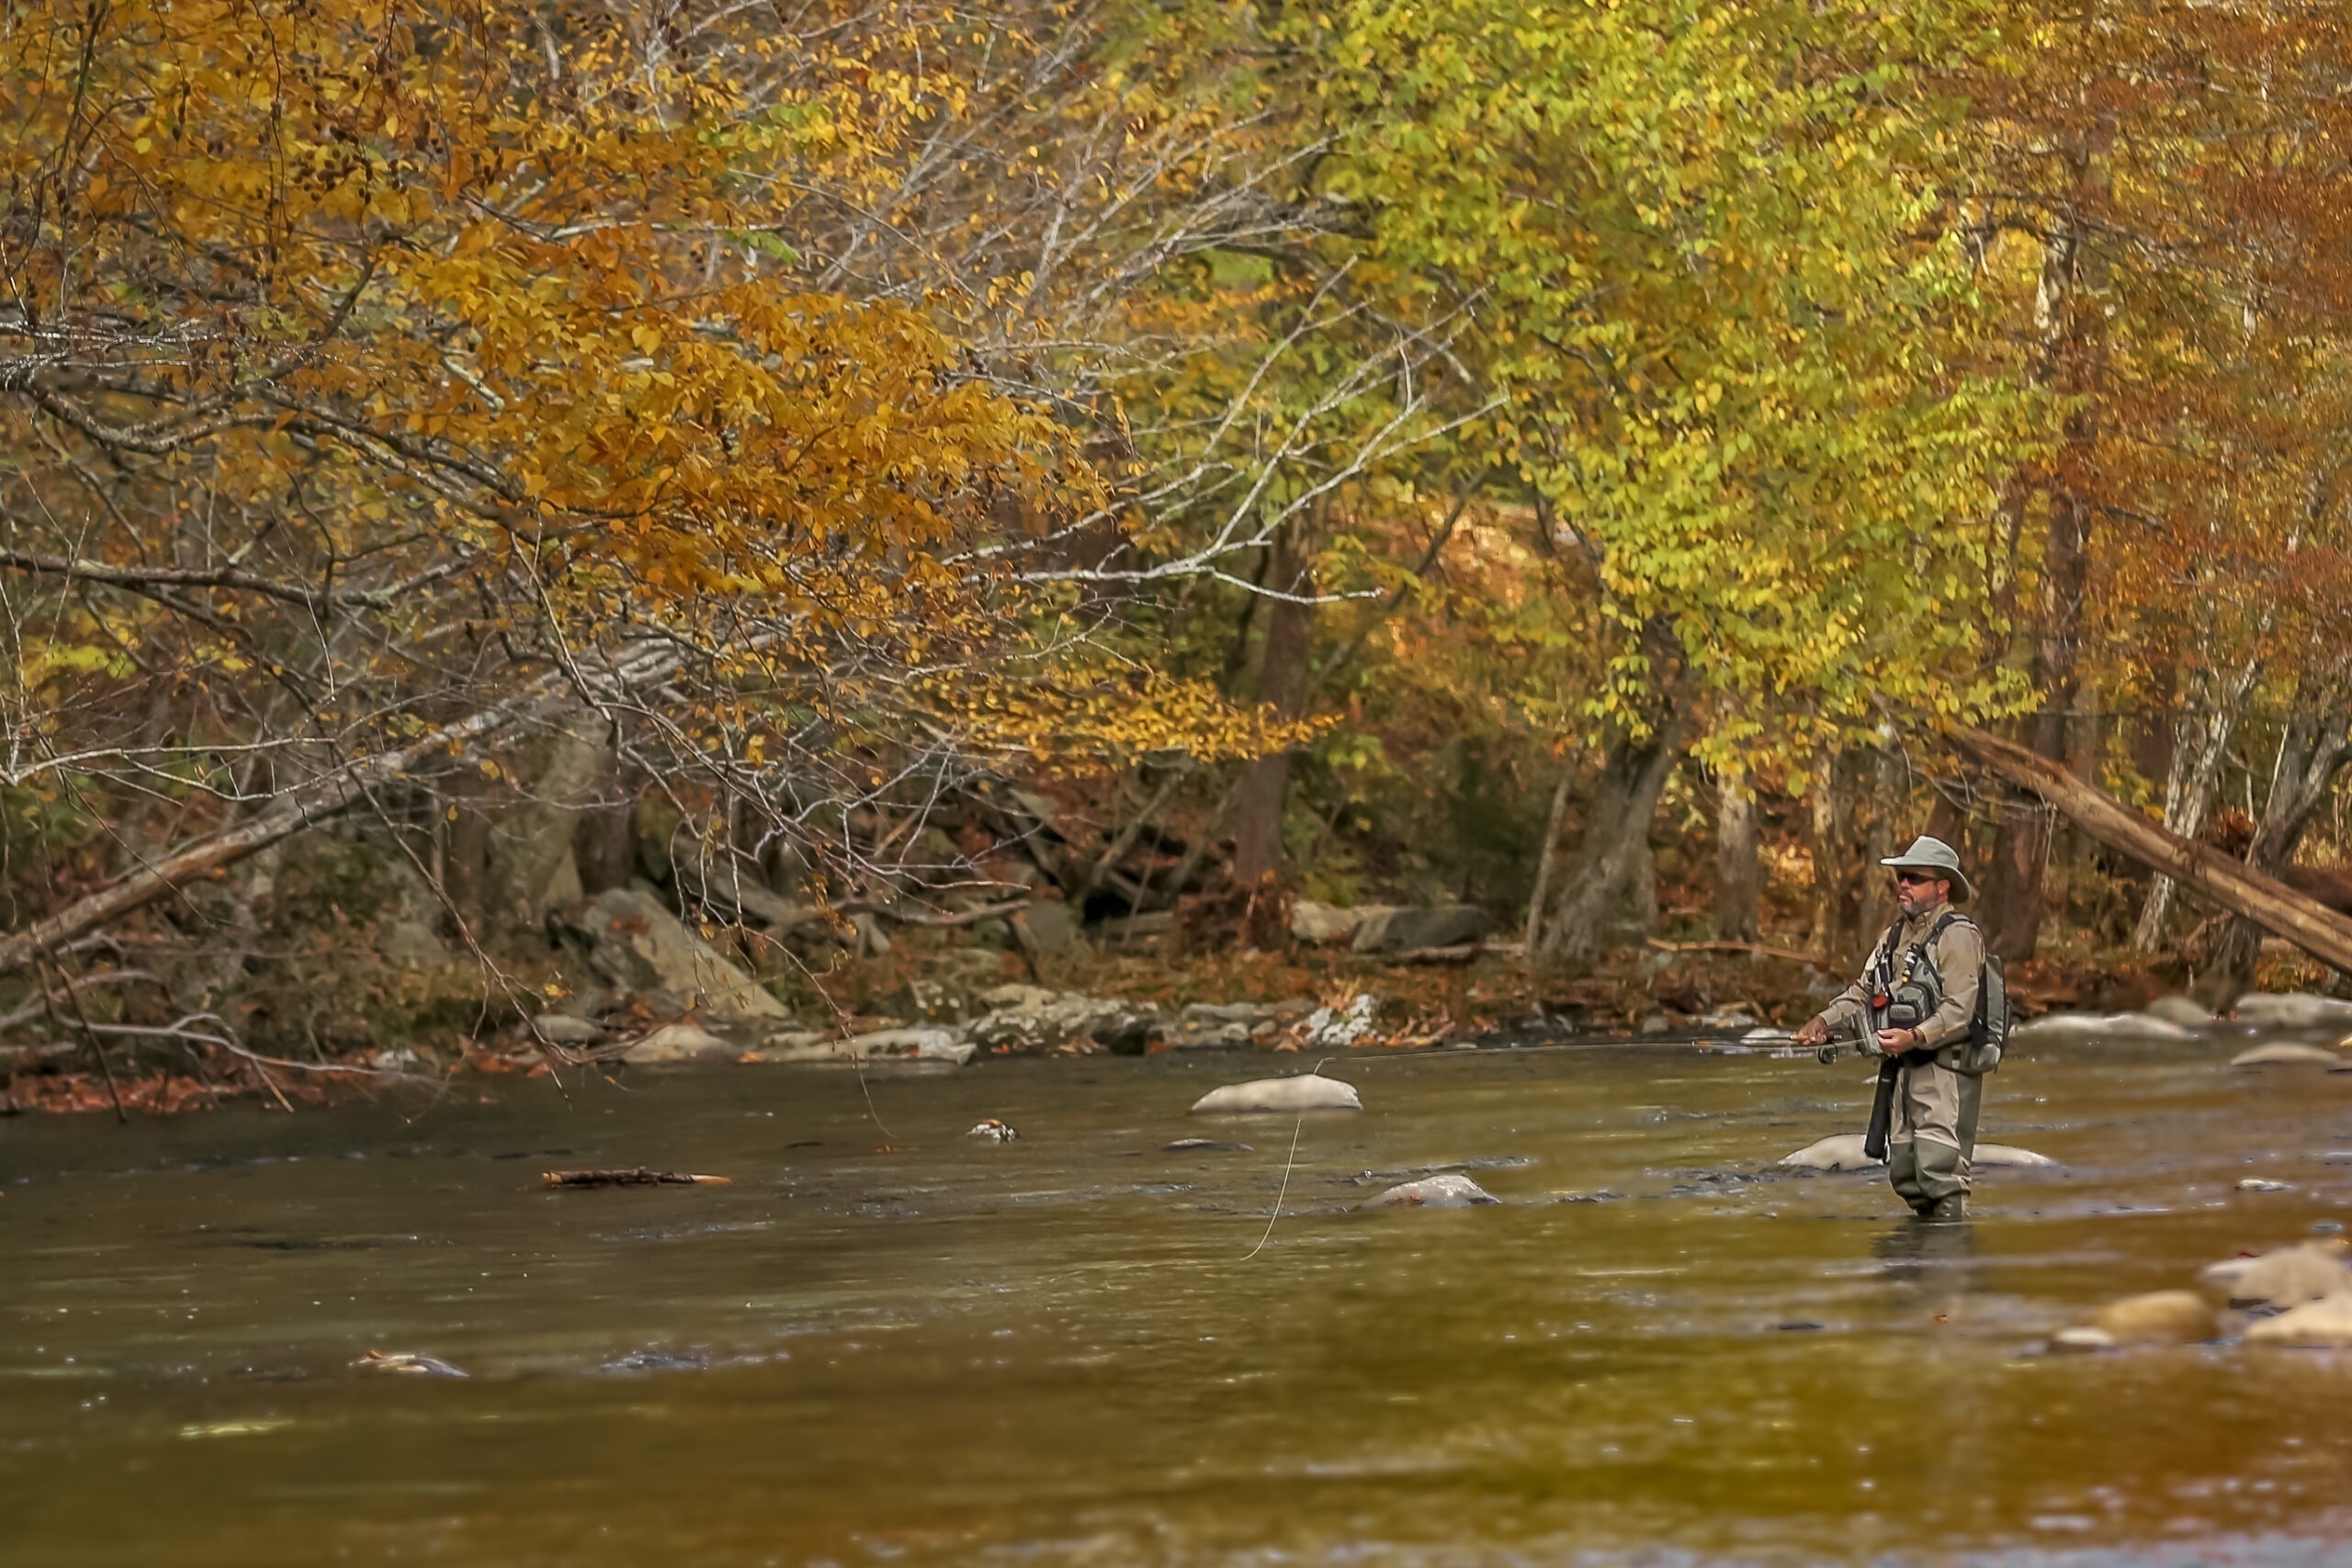 An angler fly fishes in the Tennessee outdoors.